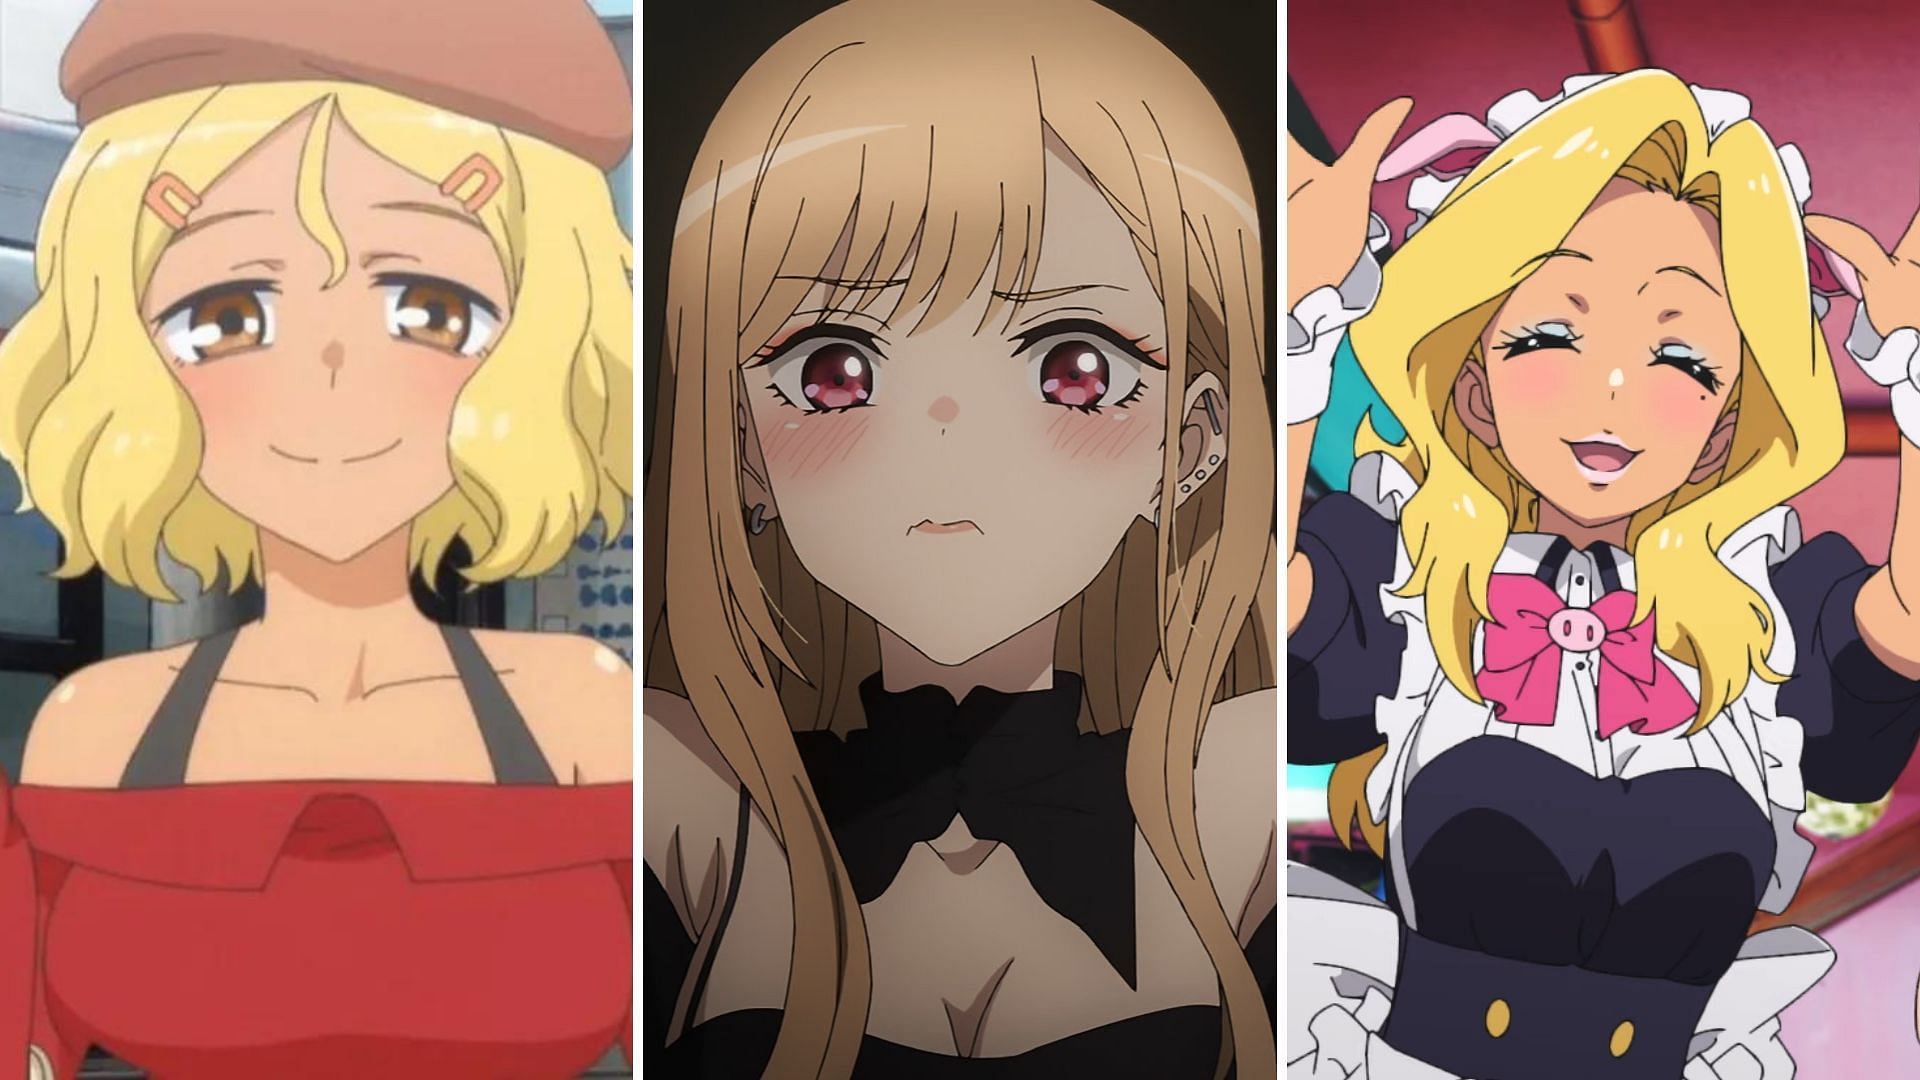 15 Completely Insane Anime School Girls and the Bad Things They Did